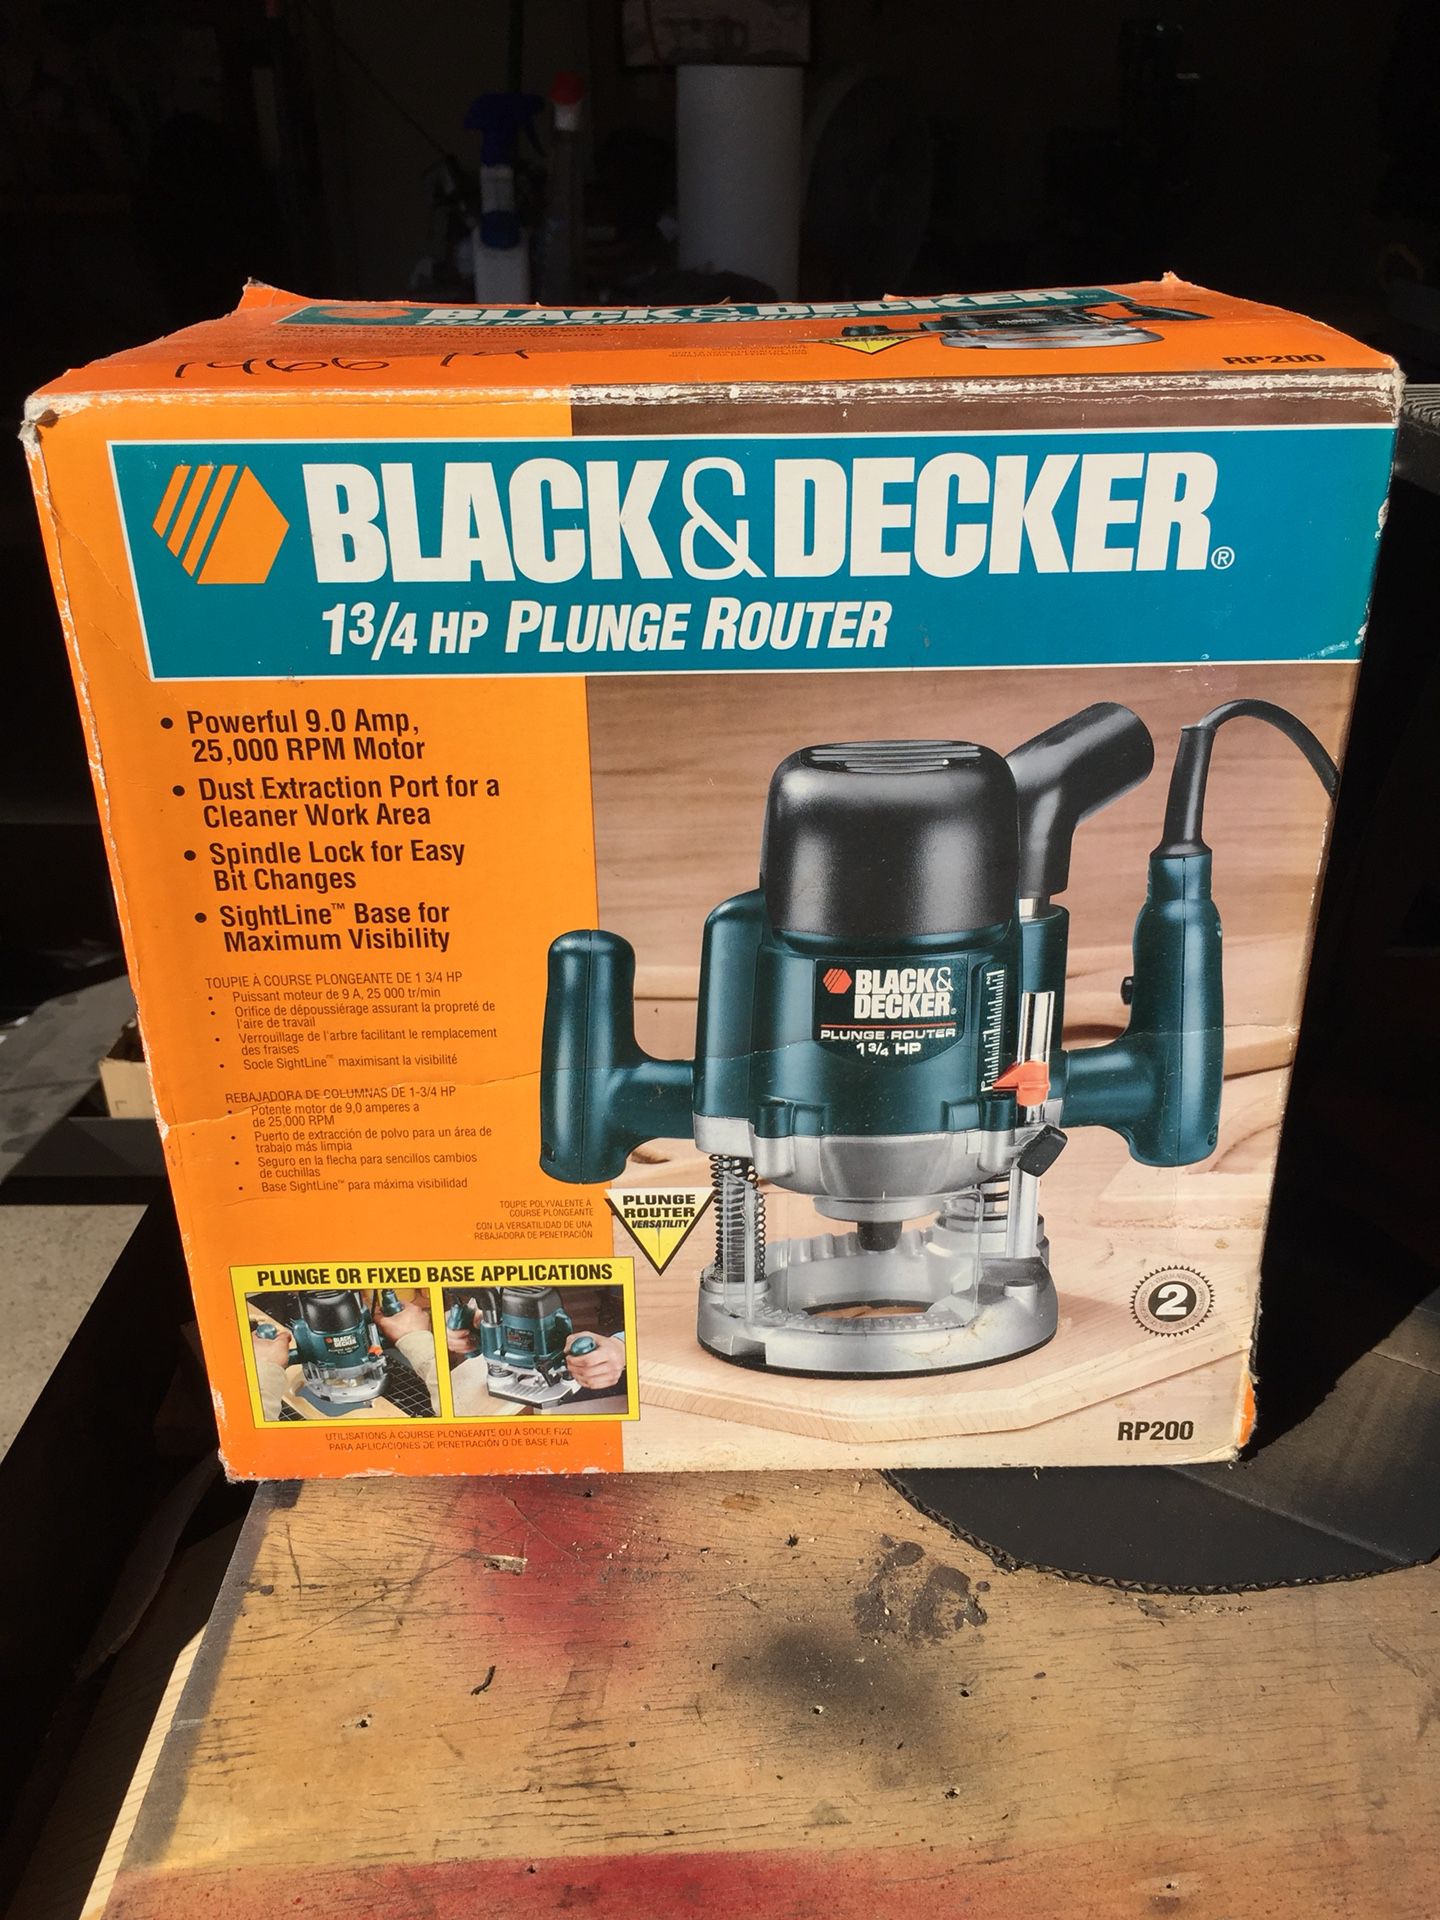 Black and Decker 1 3/4 HP Plunge Router